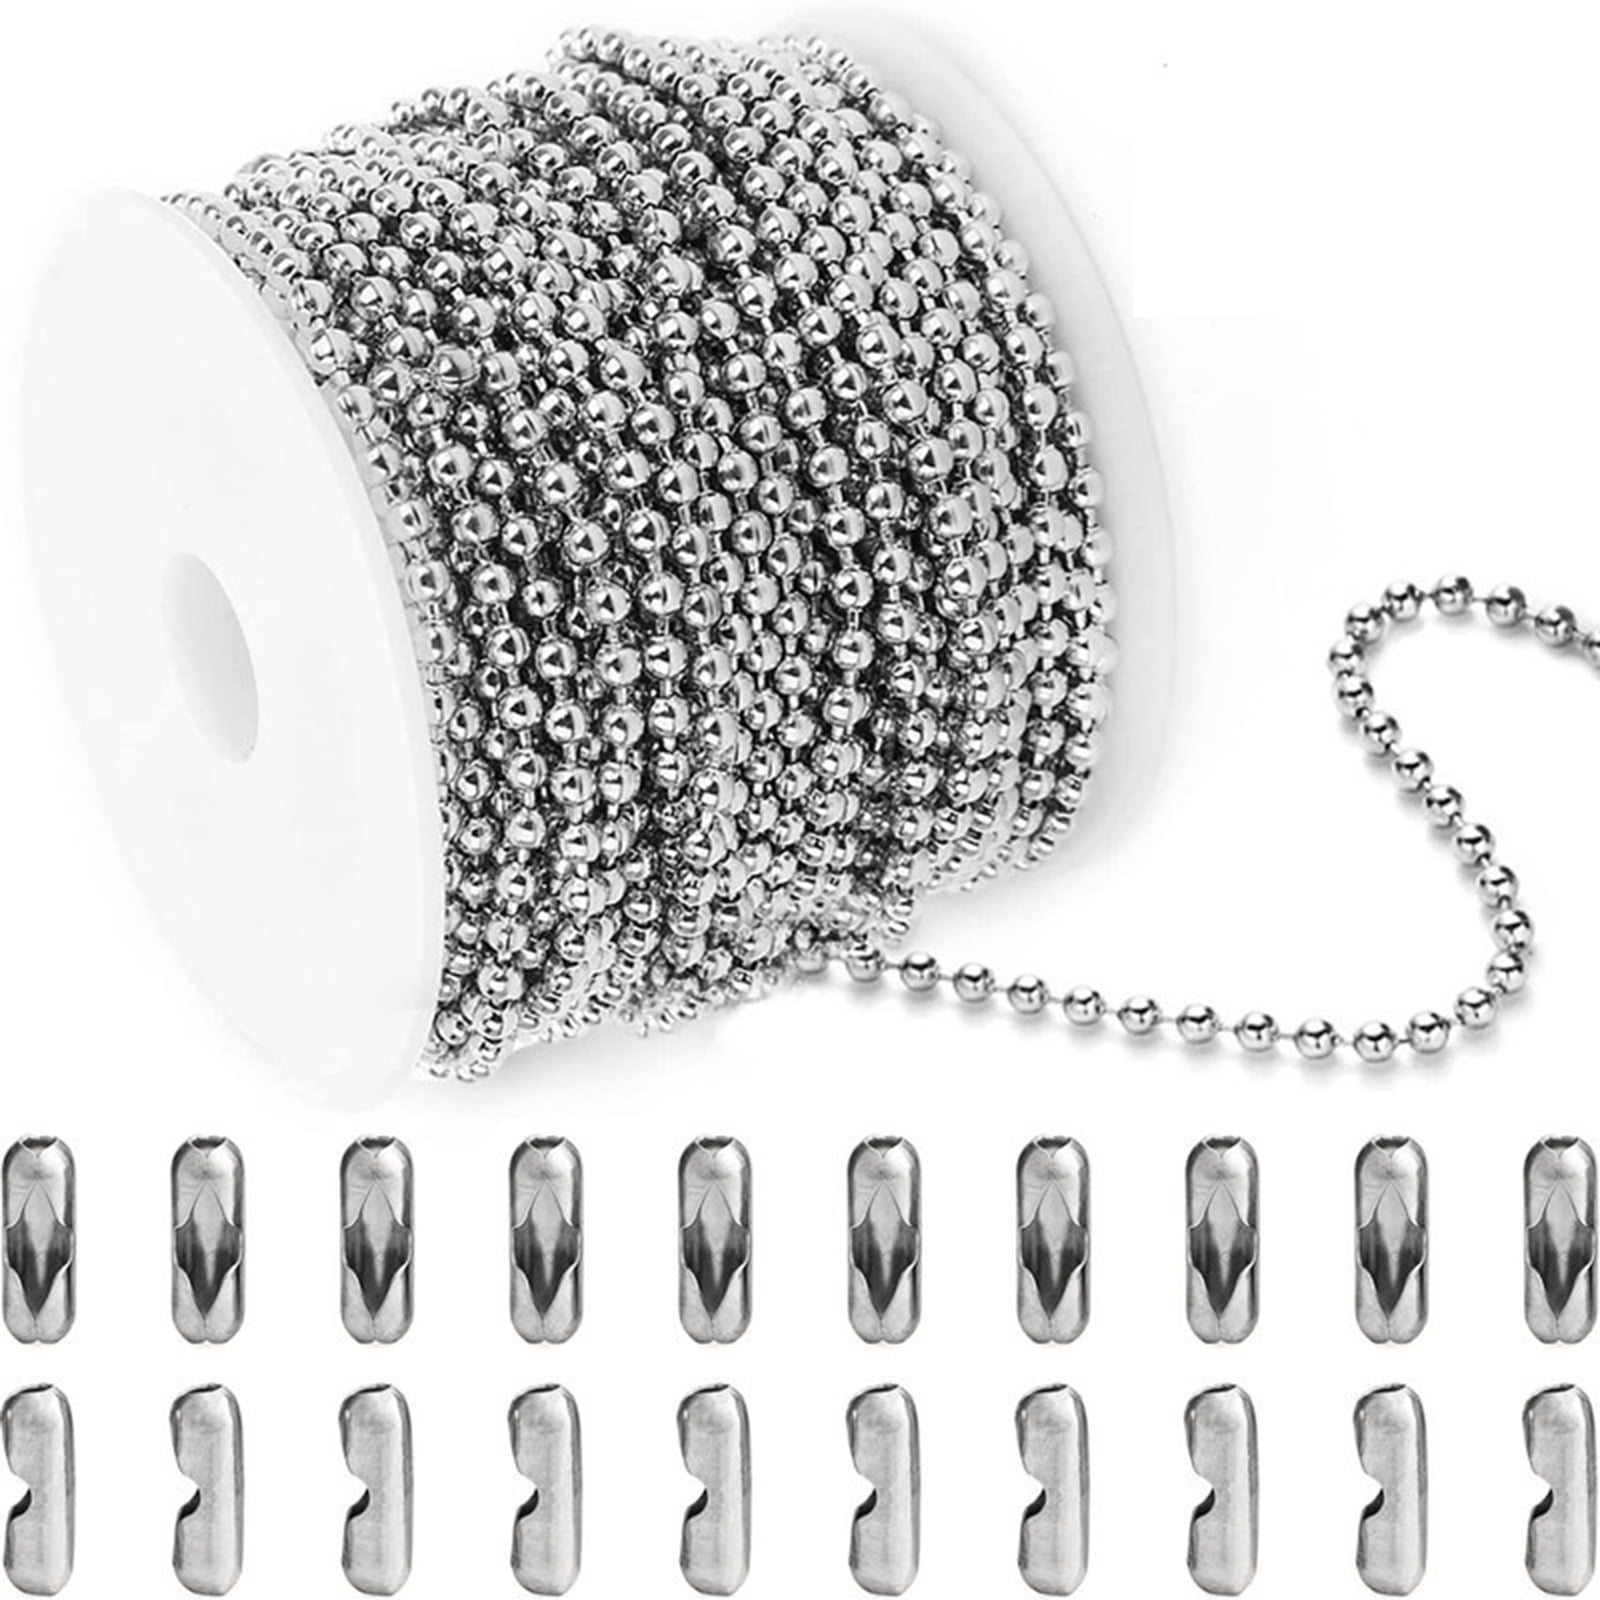 Stainless Steel Ball Chain, Necklace Chain Ball Bead, 55ft Bead Chain Ball  Chain Bulk Bead Chain with 100 Pcs Matching Connectors Clasps for Necklace  Hanging, Dog Tag, DIY Crafts, 2.0mm Diameter :